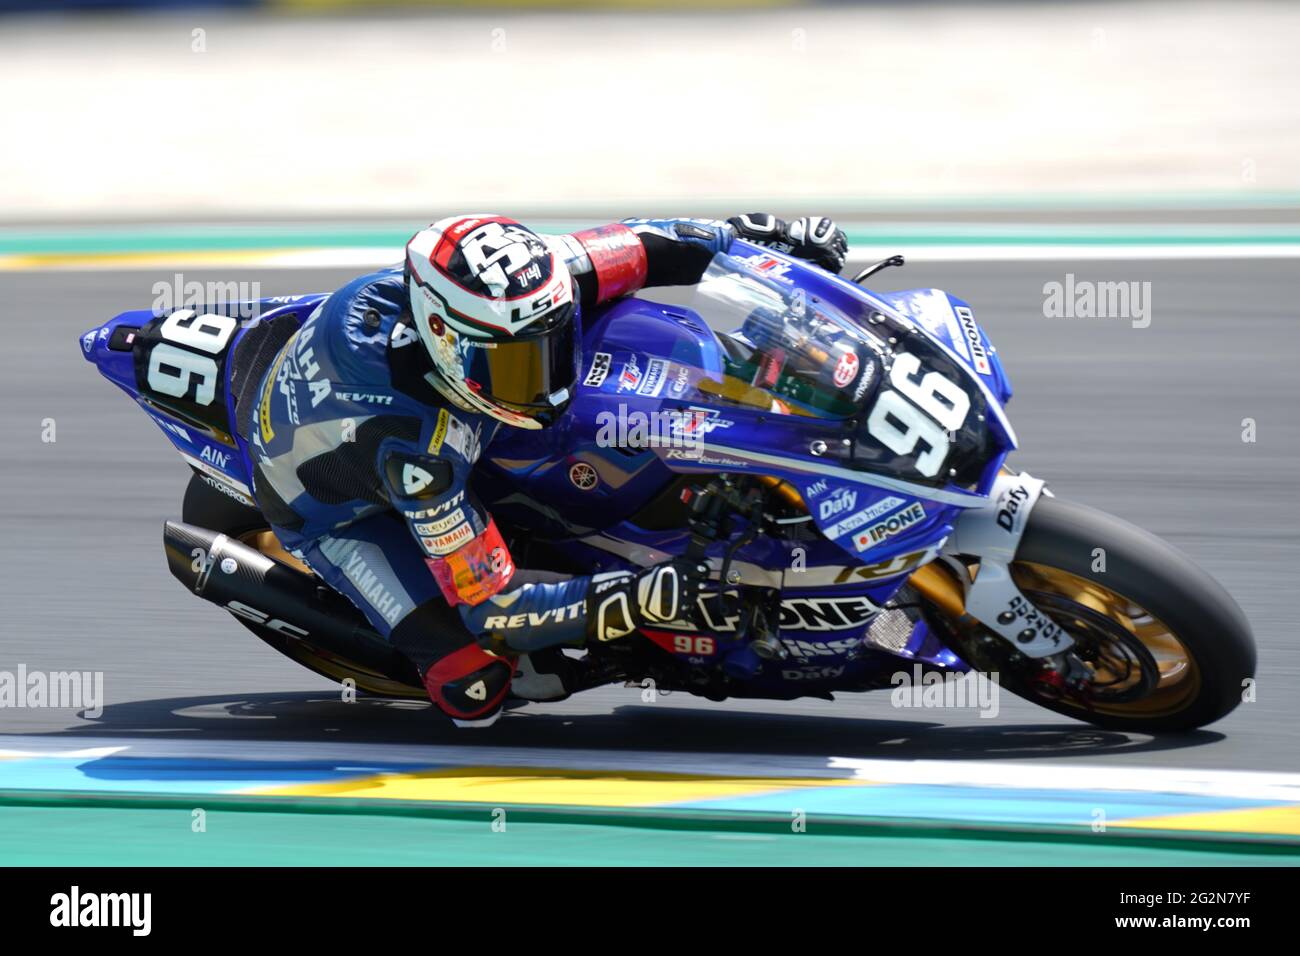 Le Mans, Sarthe, France. 12th June, 2021. MOTO AIN YamahaYZF-R1 #96 RANDY  DE PUNIET (FRA) in action during the race of 44th edition of the 24 hours  motorcycle of Le Mans at